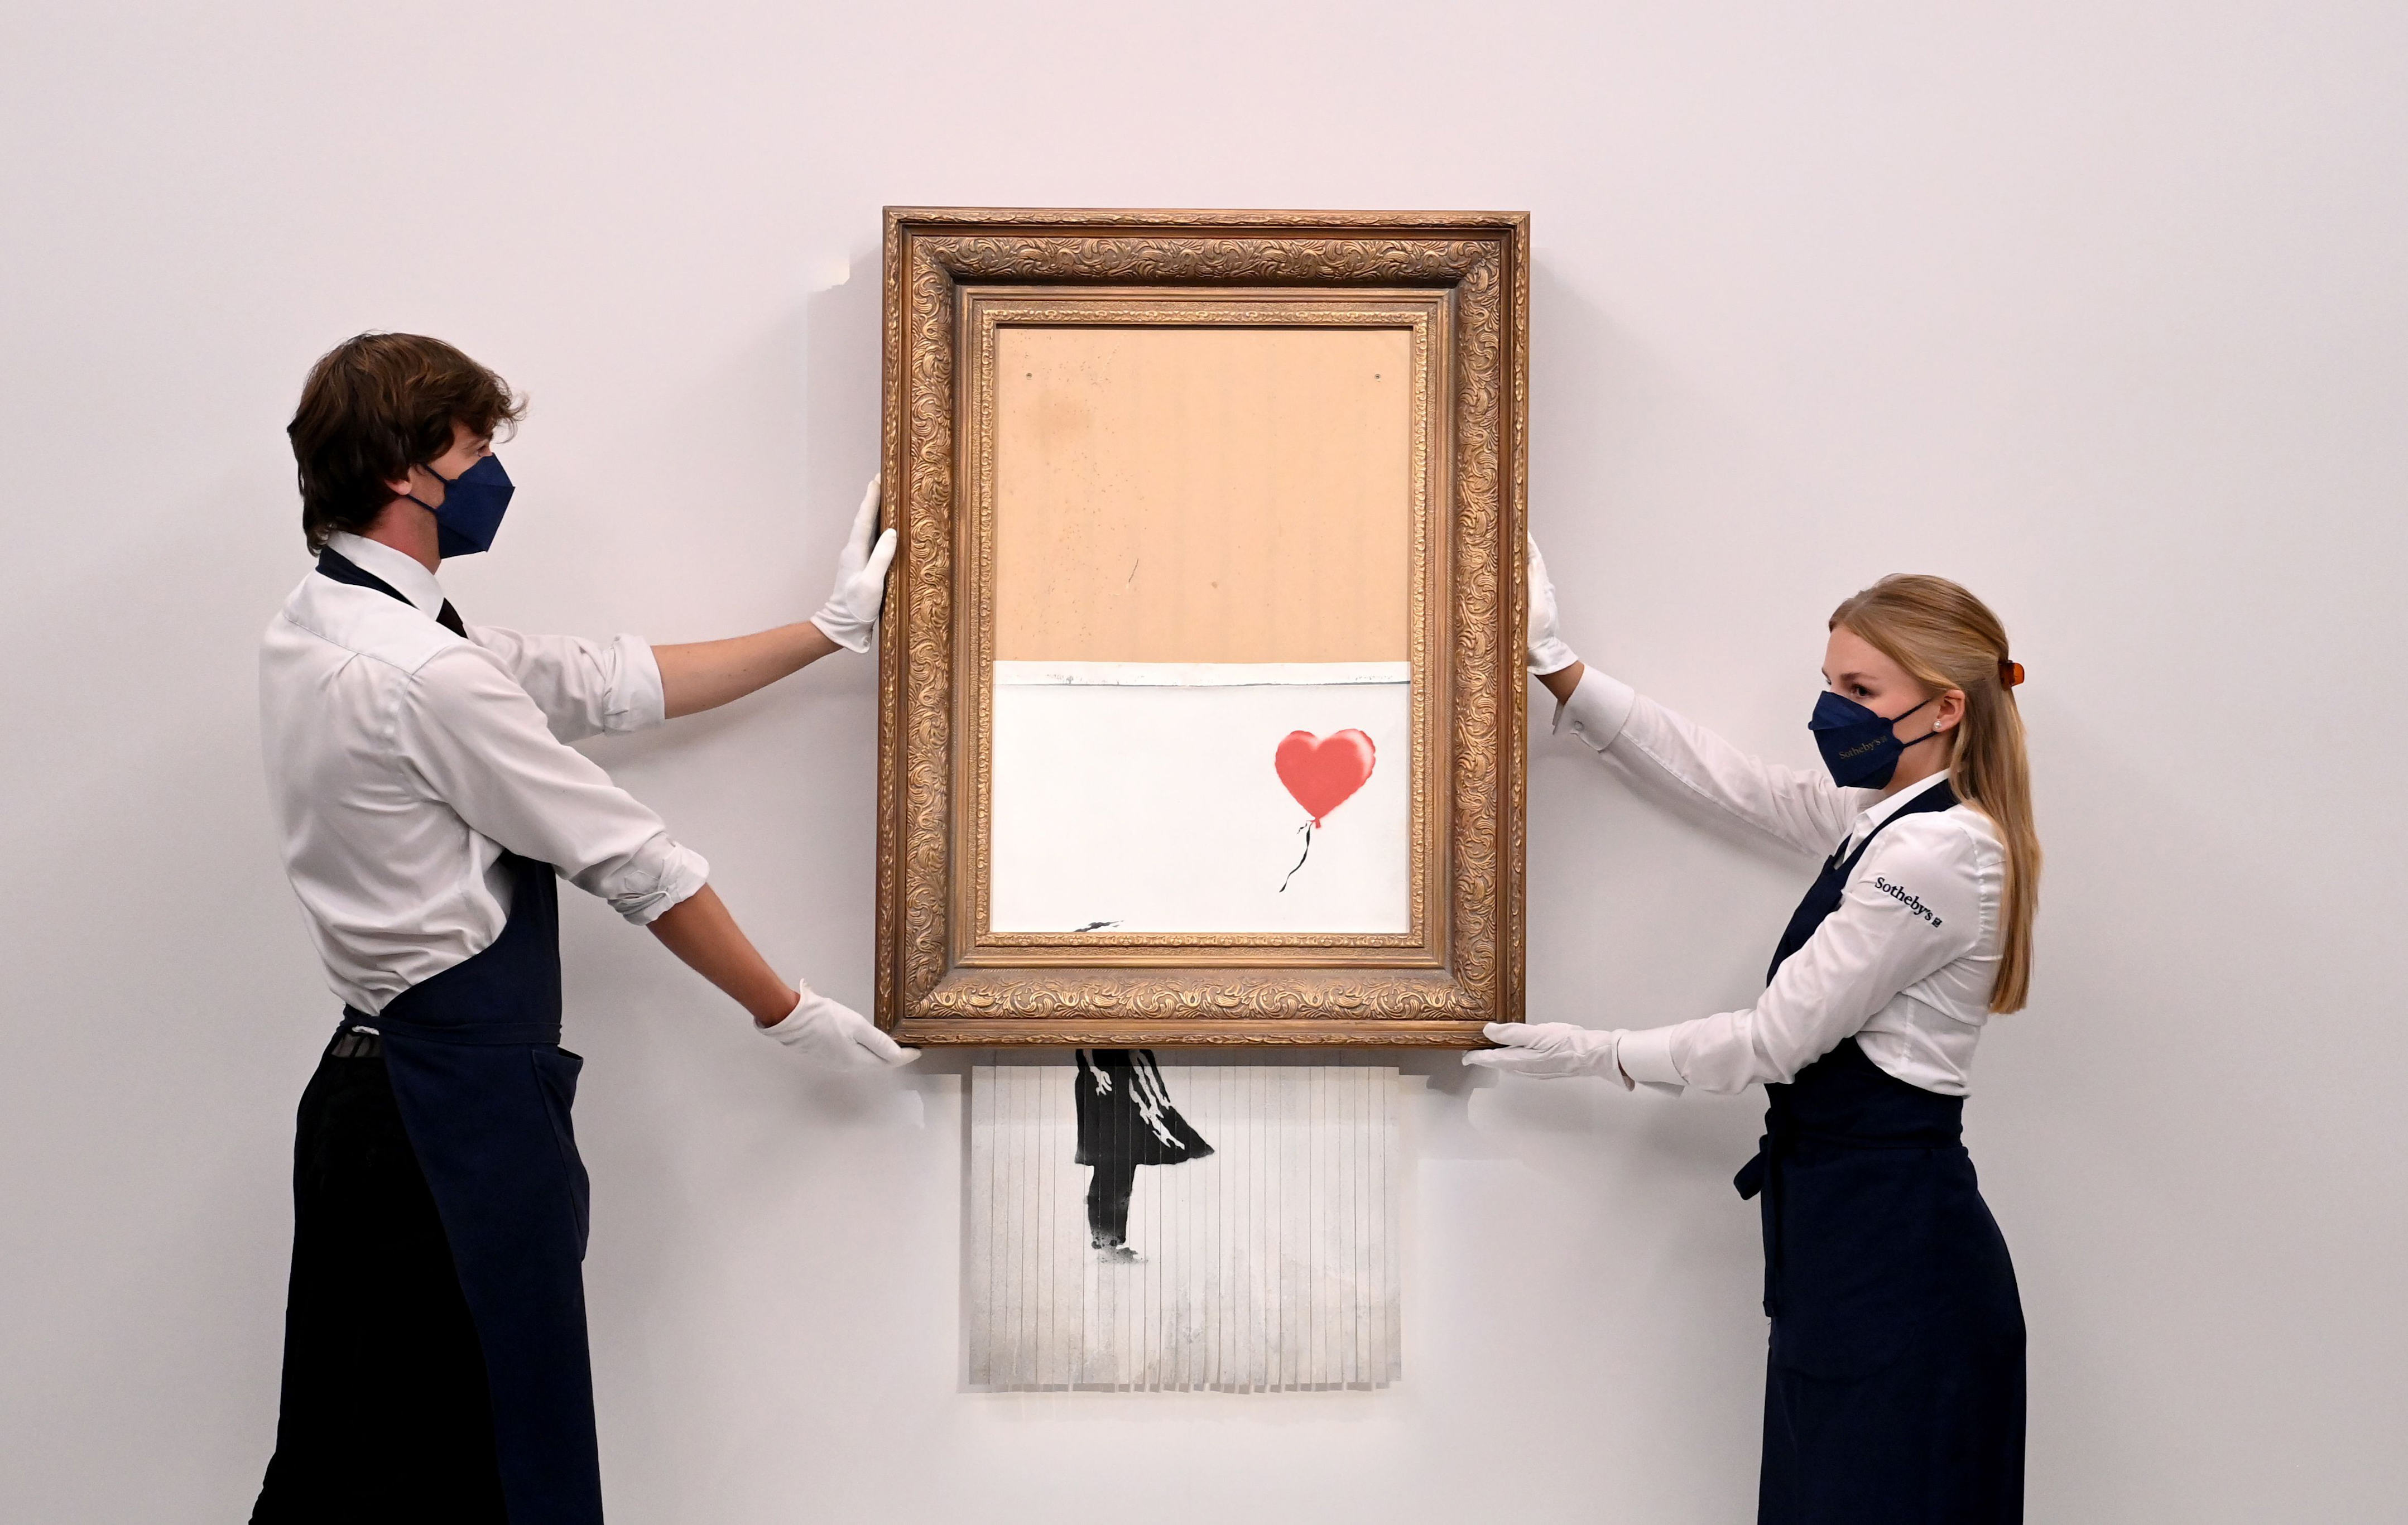 amazon, call off the hunt for banksy: why we need to stop trying to unmask the graffiti artist